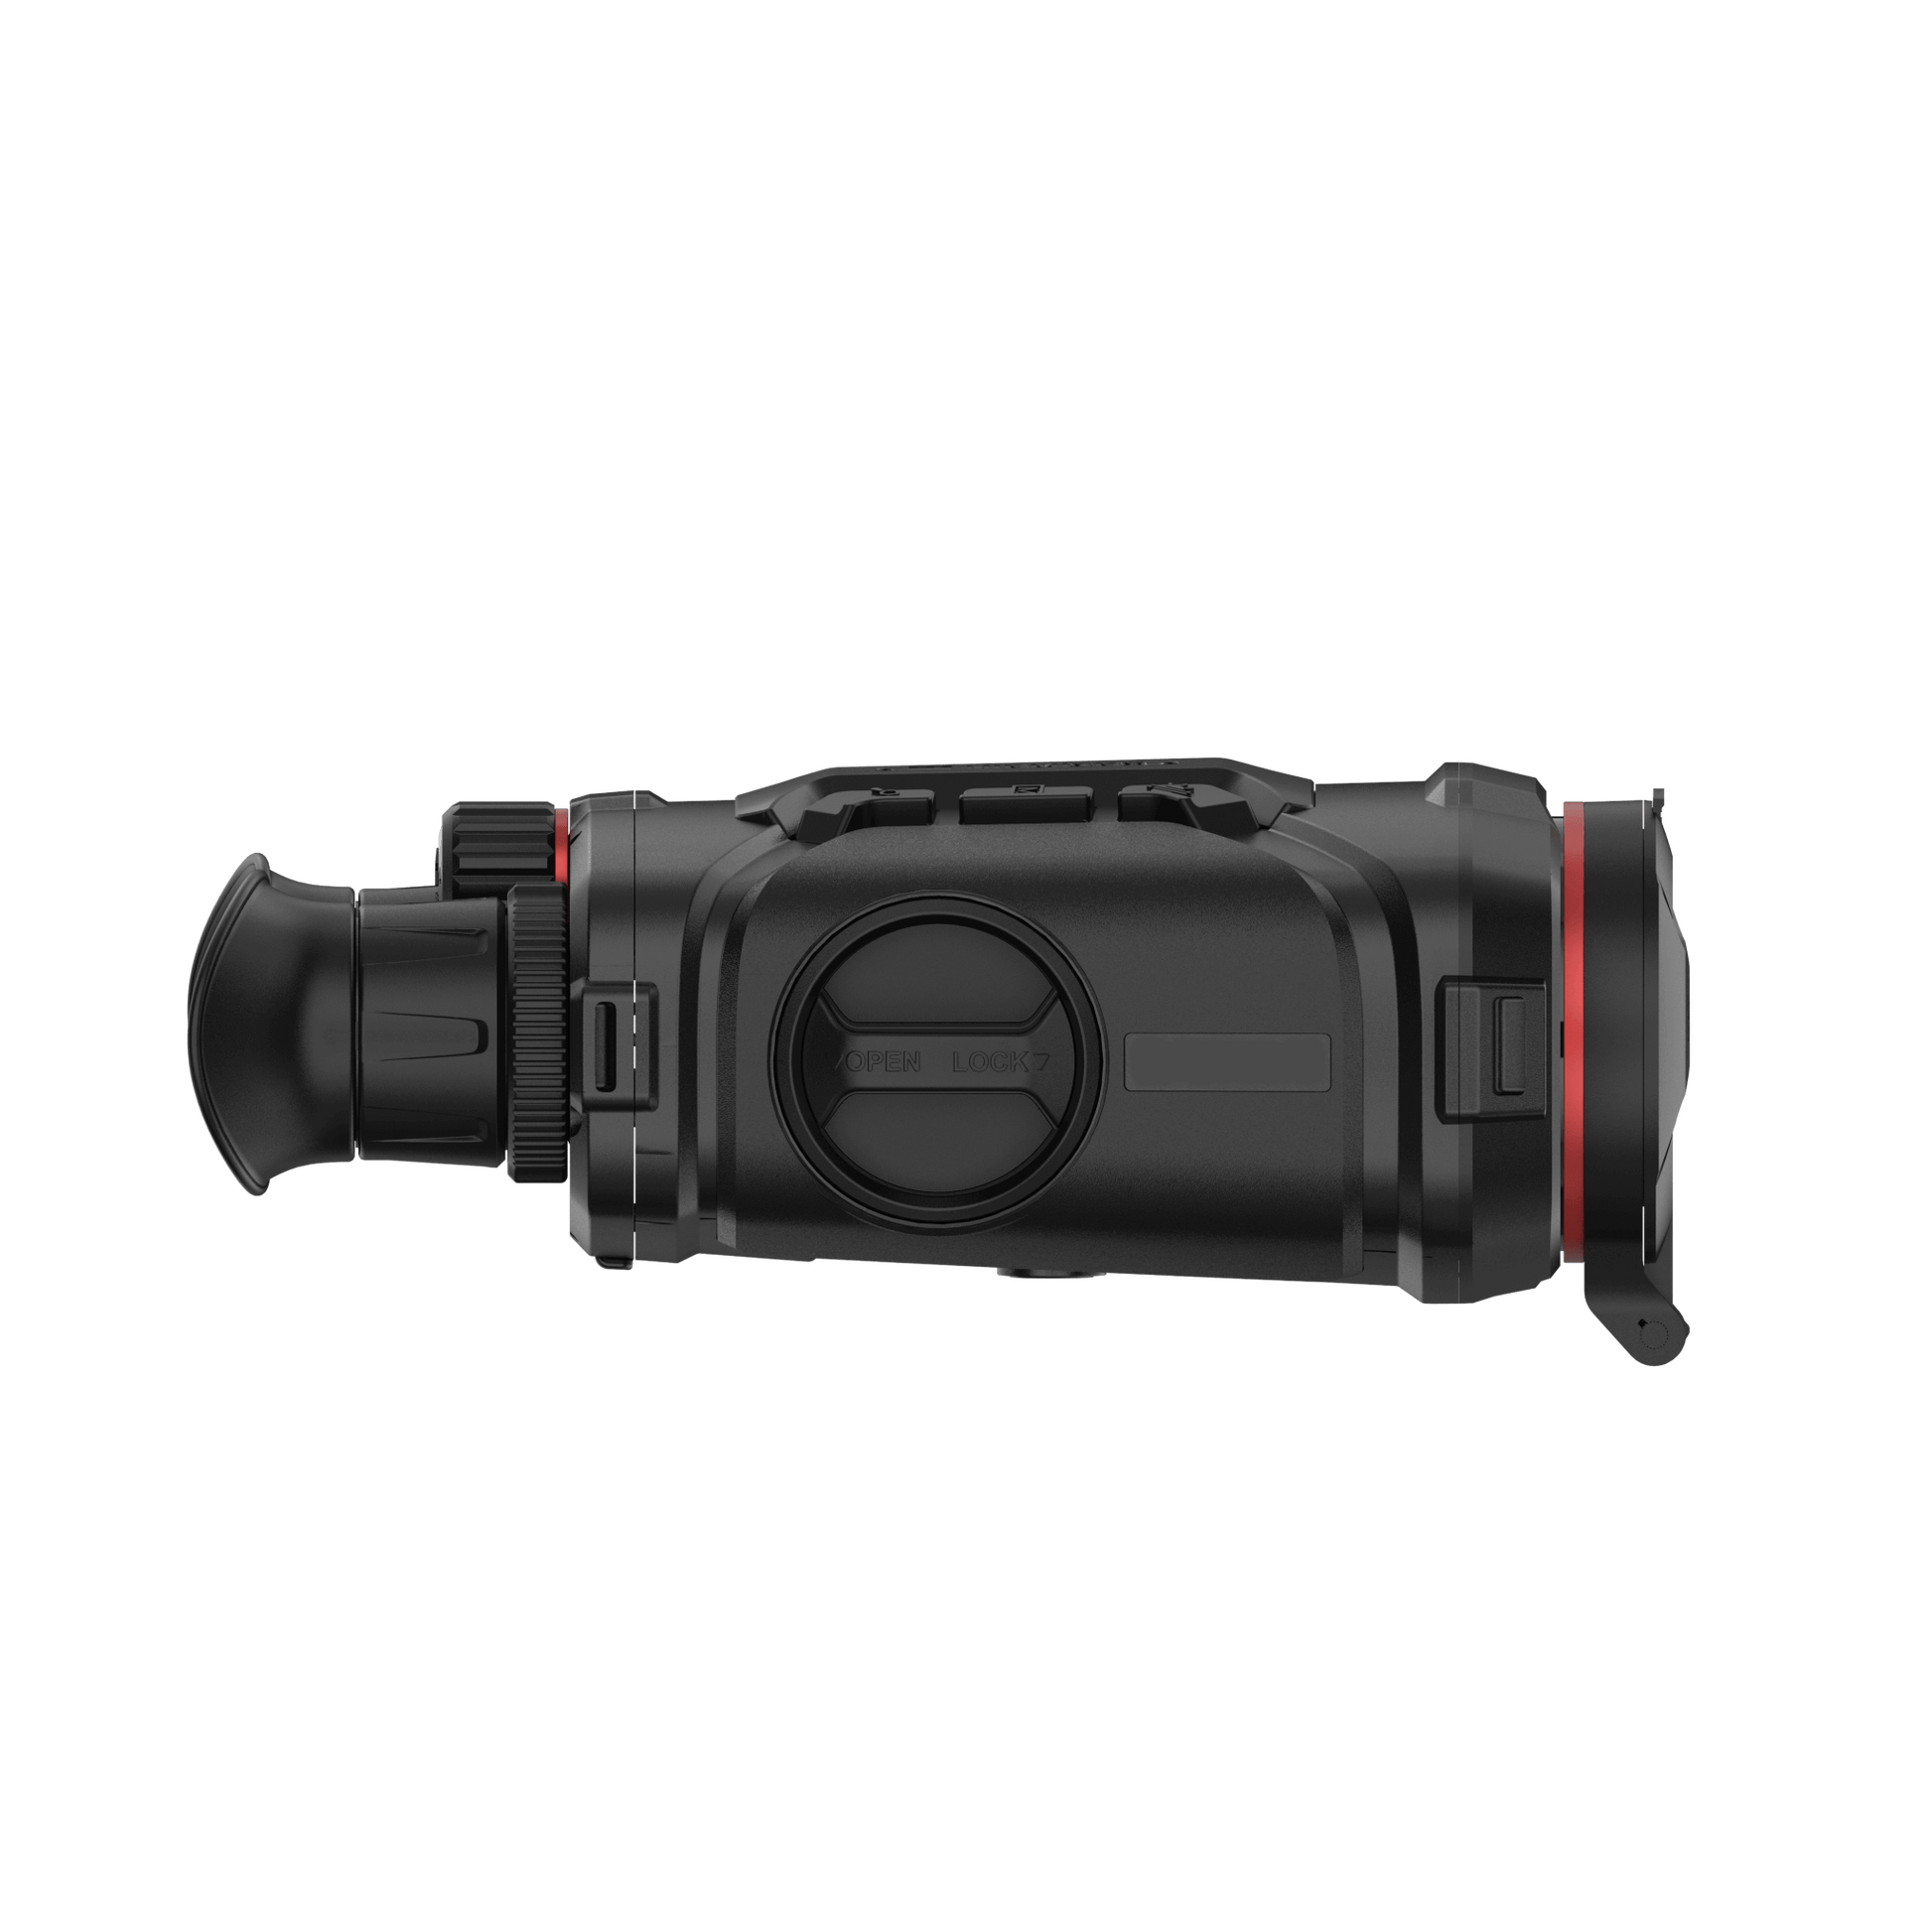 eld thermal binocular with infrared and optical capabilities - Right Side View